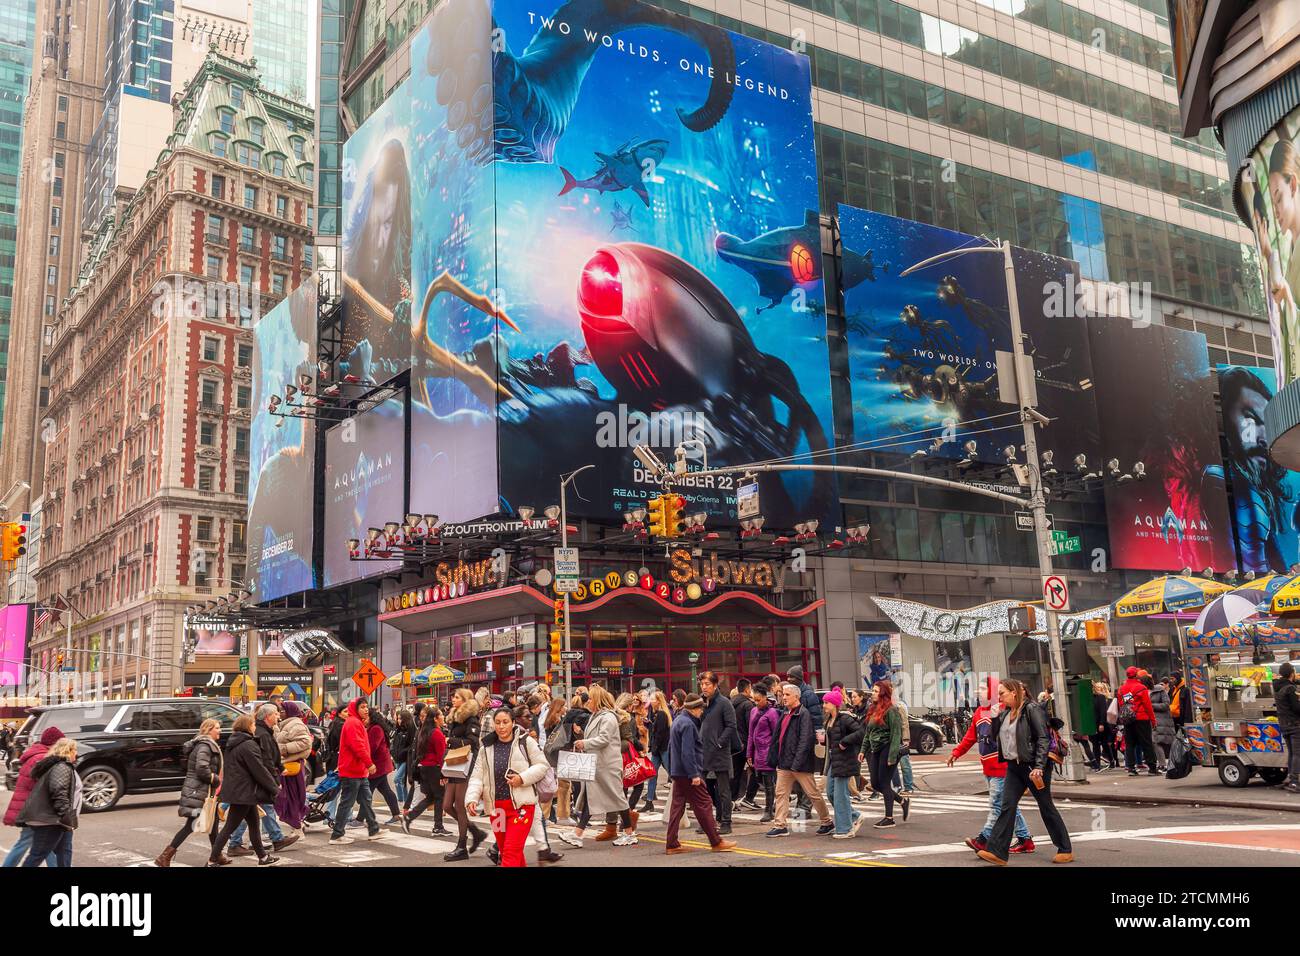 Hordes of people cross West 42nd Street under advertising for the Warner Bros. Pictures’  “Aquaman, The Lost Kingdom” film in Times Square in New York on Saturday, December 2, 2023. The film is slated to be released December 22 and is part of DC Comics’ franchises. (© Richard B. Levine) Stock Photo